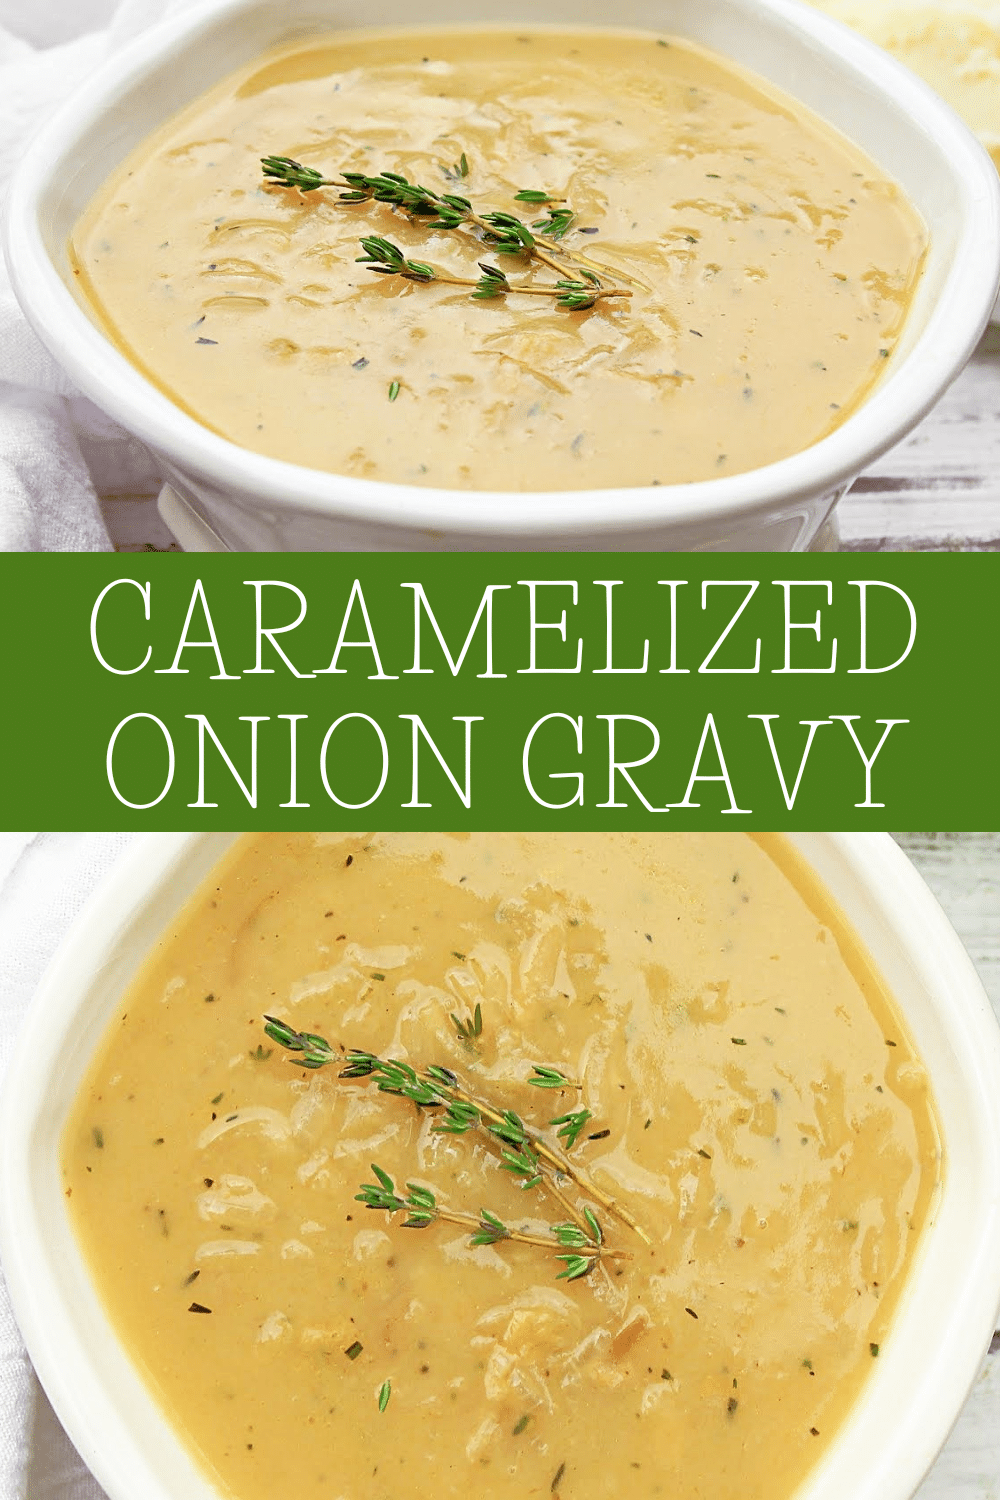 Caramelized Onion Gravy ~ Delicious onion gravy that's easy to make with simple plant-based ingredients! Serve over mashed potatoes for Thanksgiving or Christmas dinner!  via @thiswifecooks